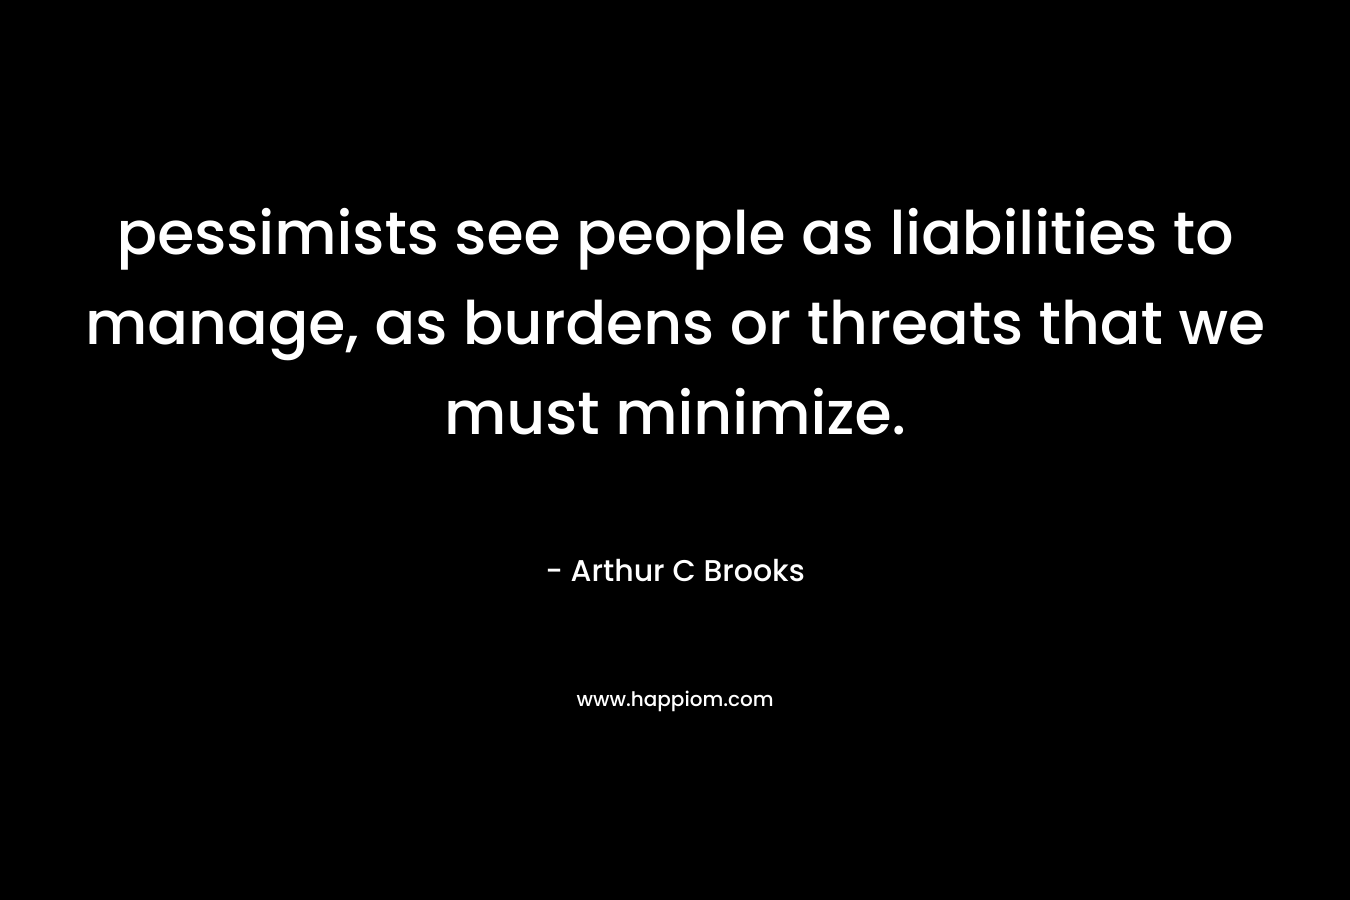 pessimists see people as liabilities to manage, as burdens or threats that we must minimize. – Arthur C Brooks